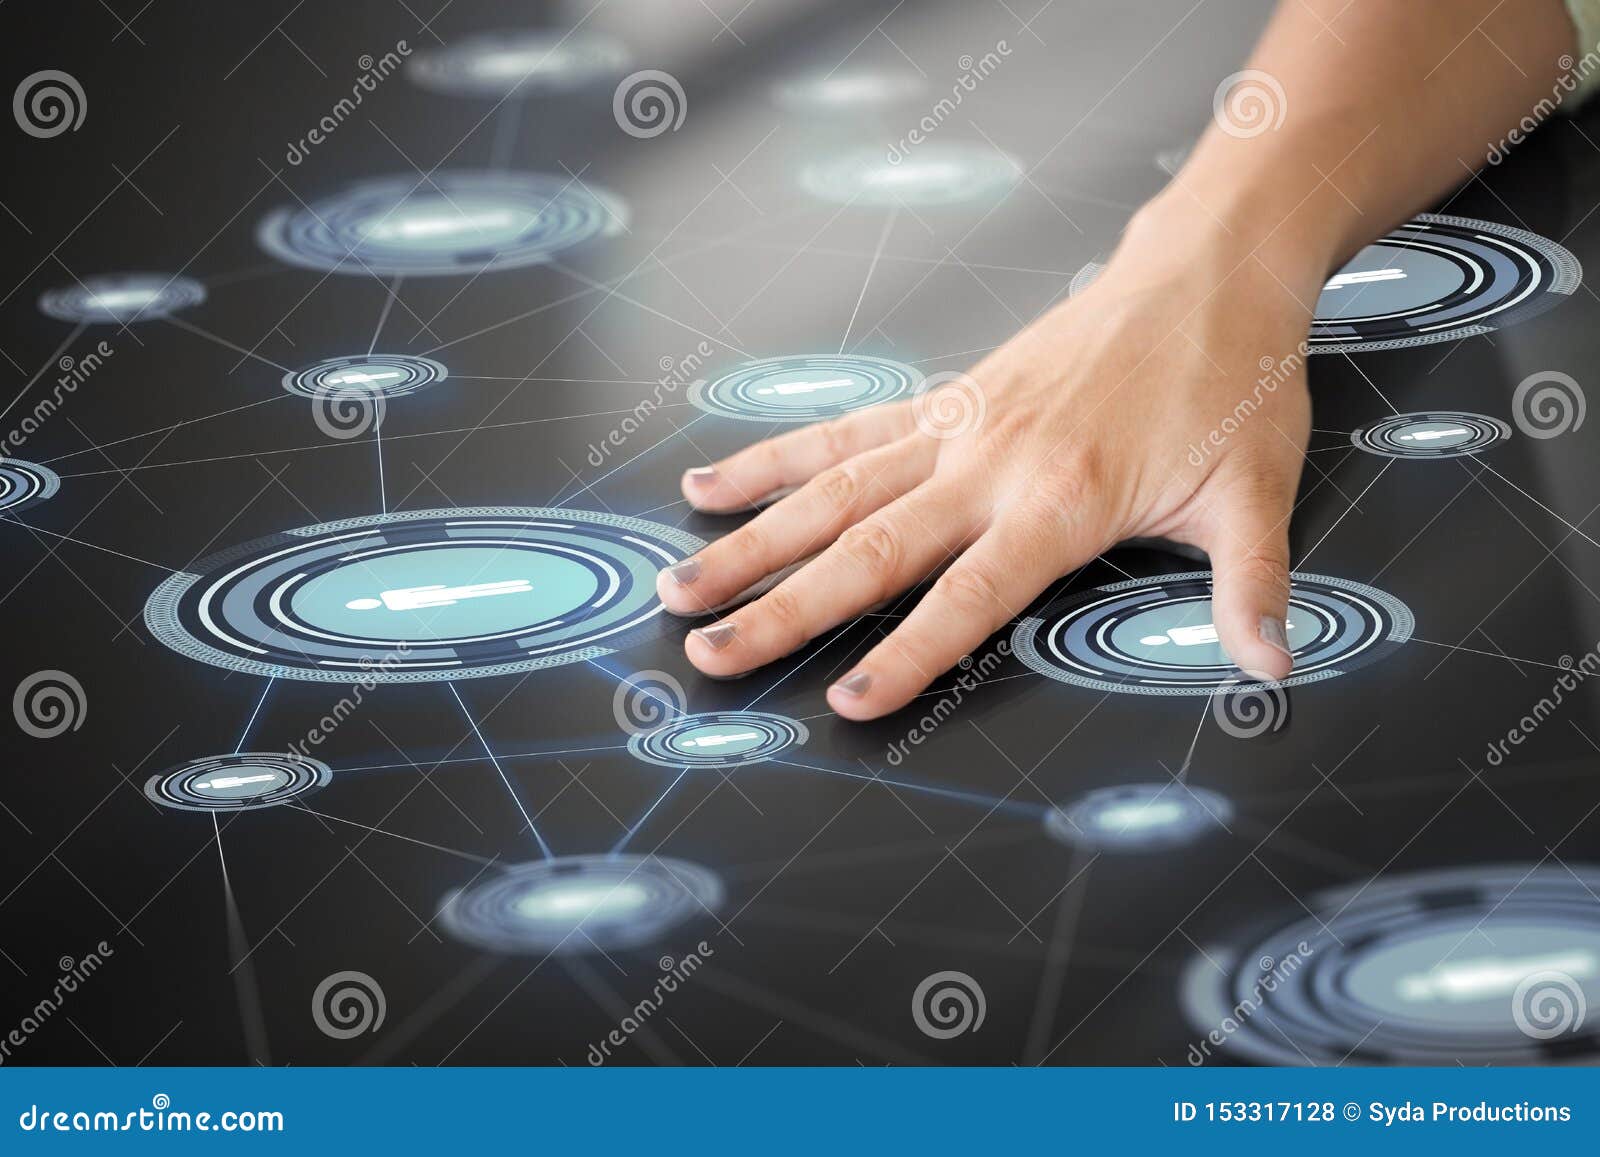 hand using interactive panel with network icons